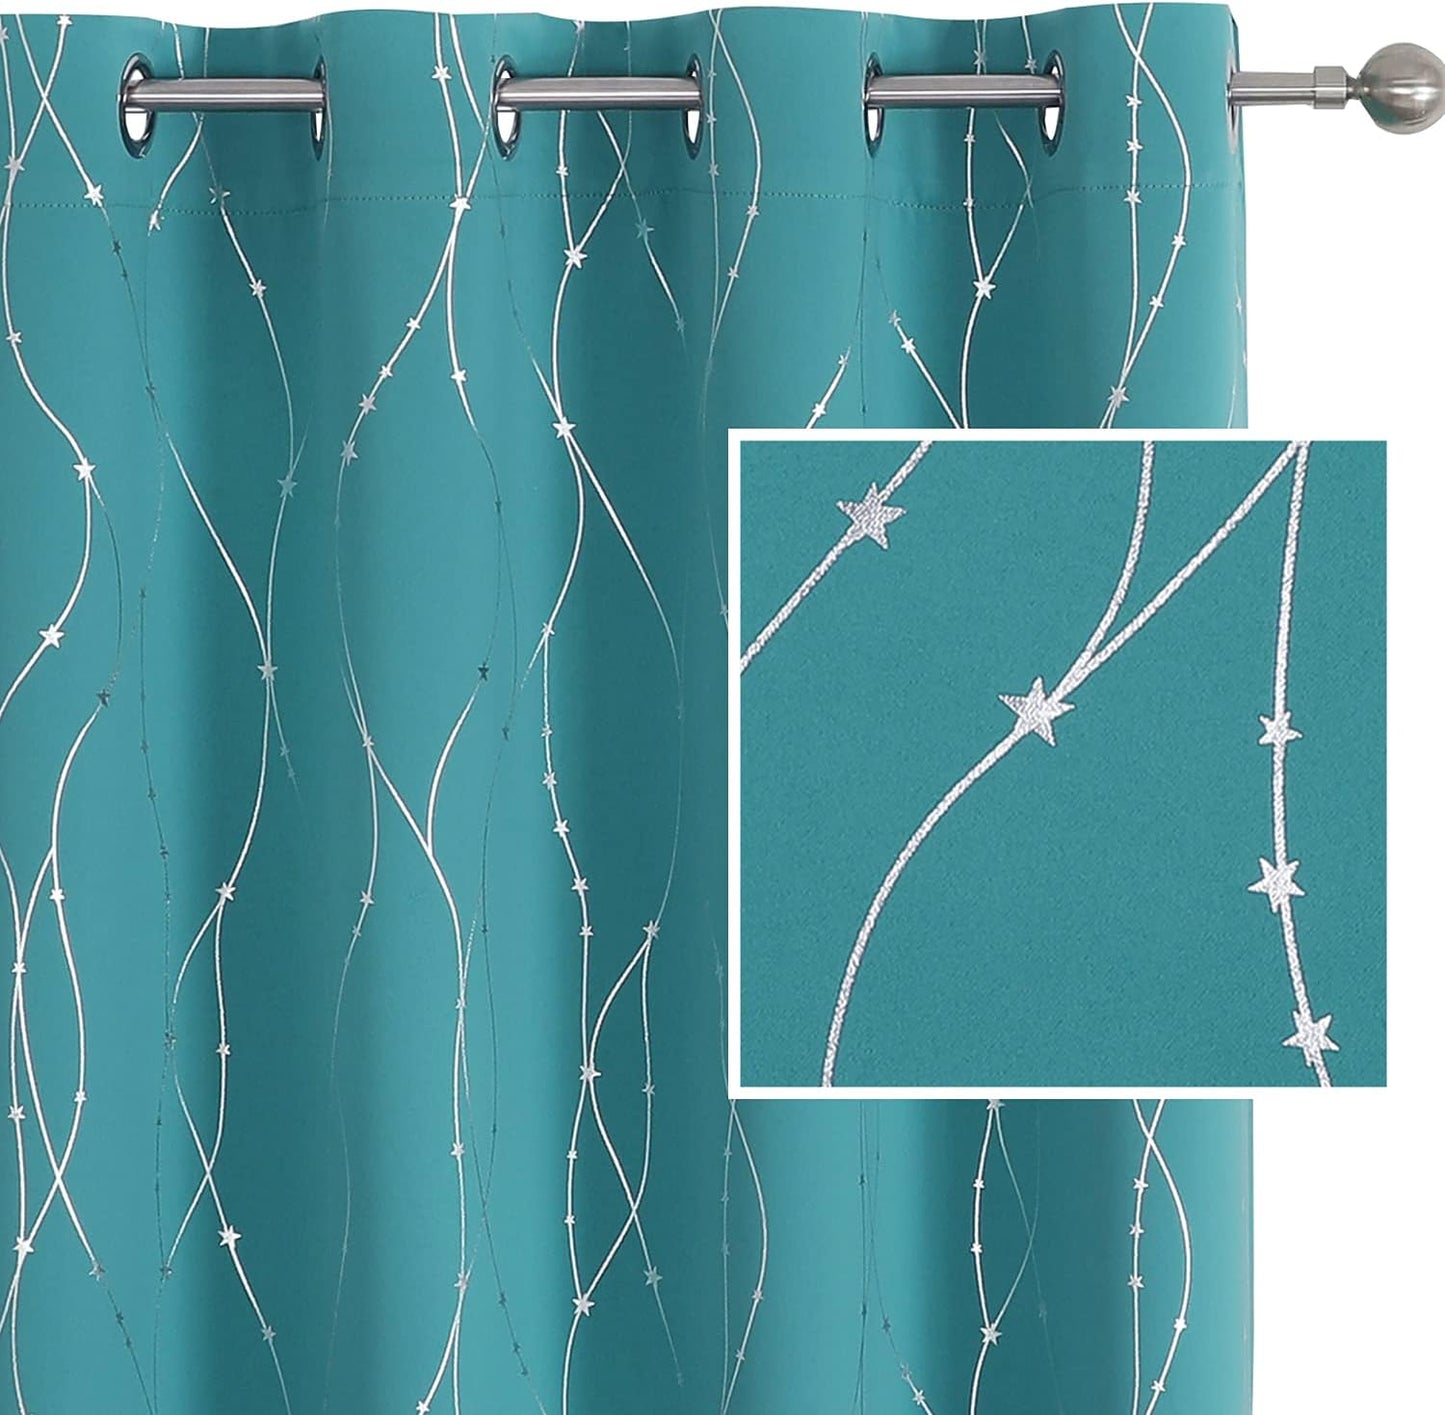 SMILE WEAVER Black Blackout Curtains for Bedroom 72 Inch Long 2 Panels,Room Darkening Curtain with Gold Print Design Noise Reducing Thermal Insulated Window Treatment Drapes for Living Room  SMILE WEAVER Teal Green Silver 52Wx45L 